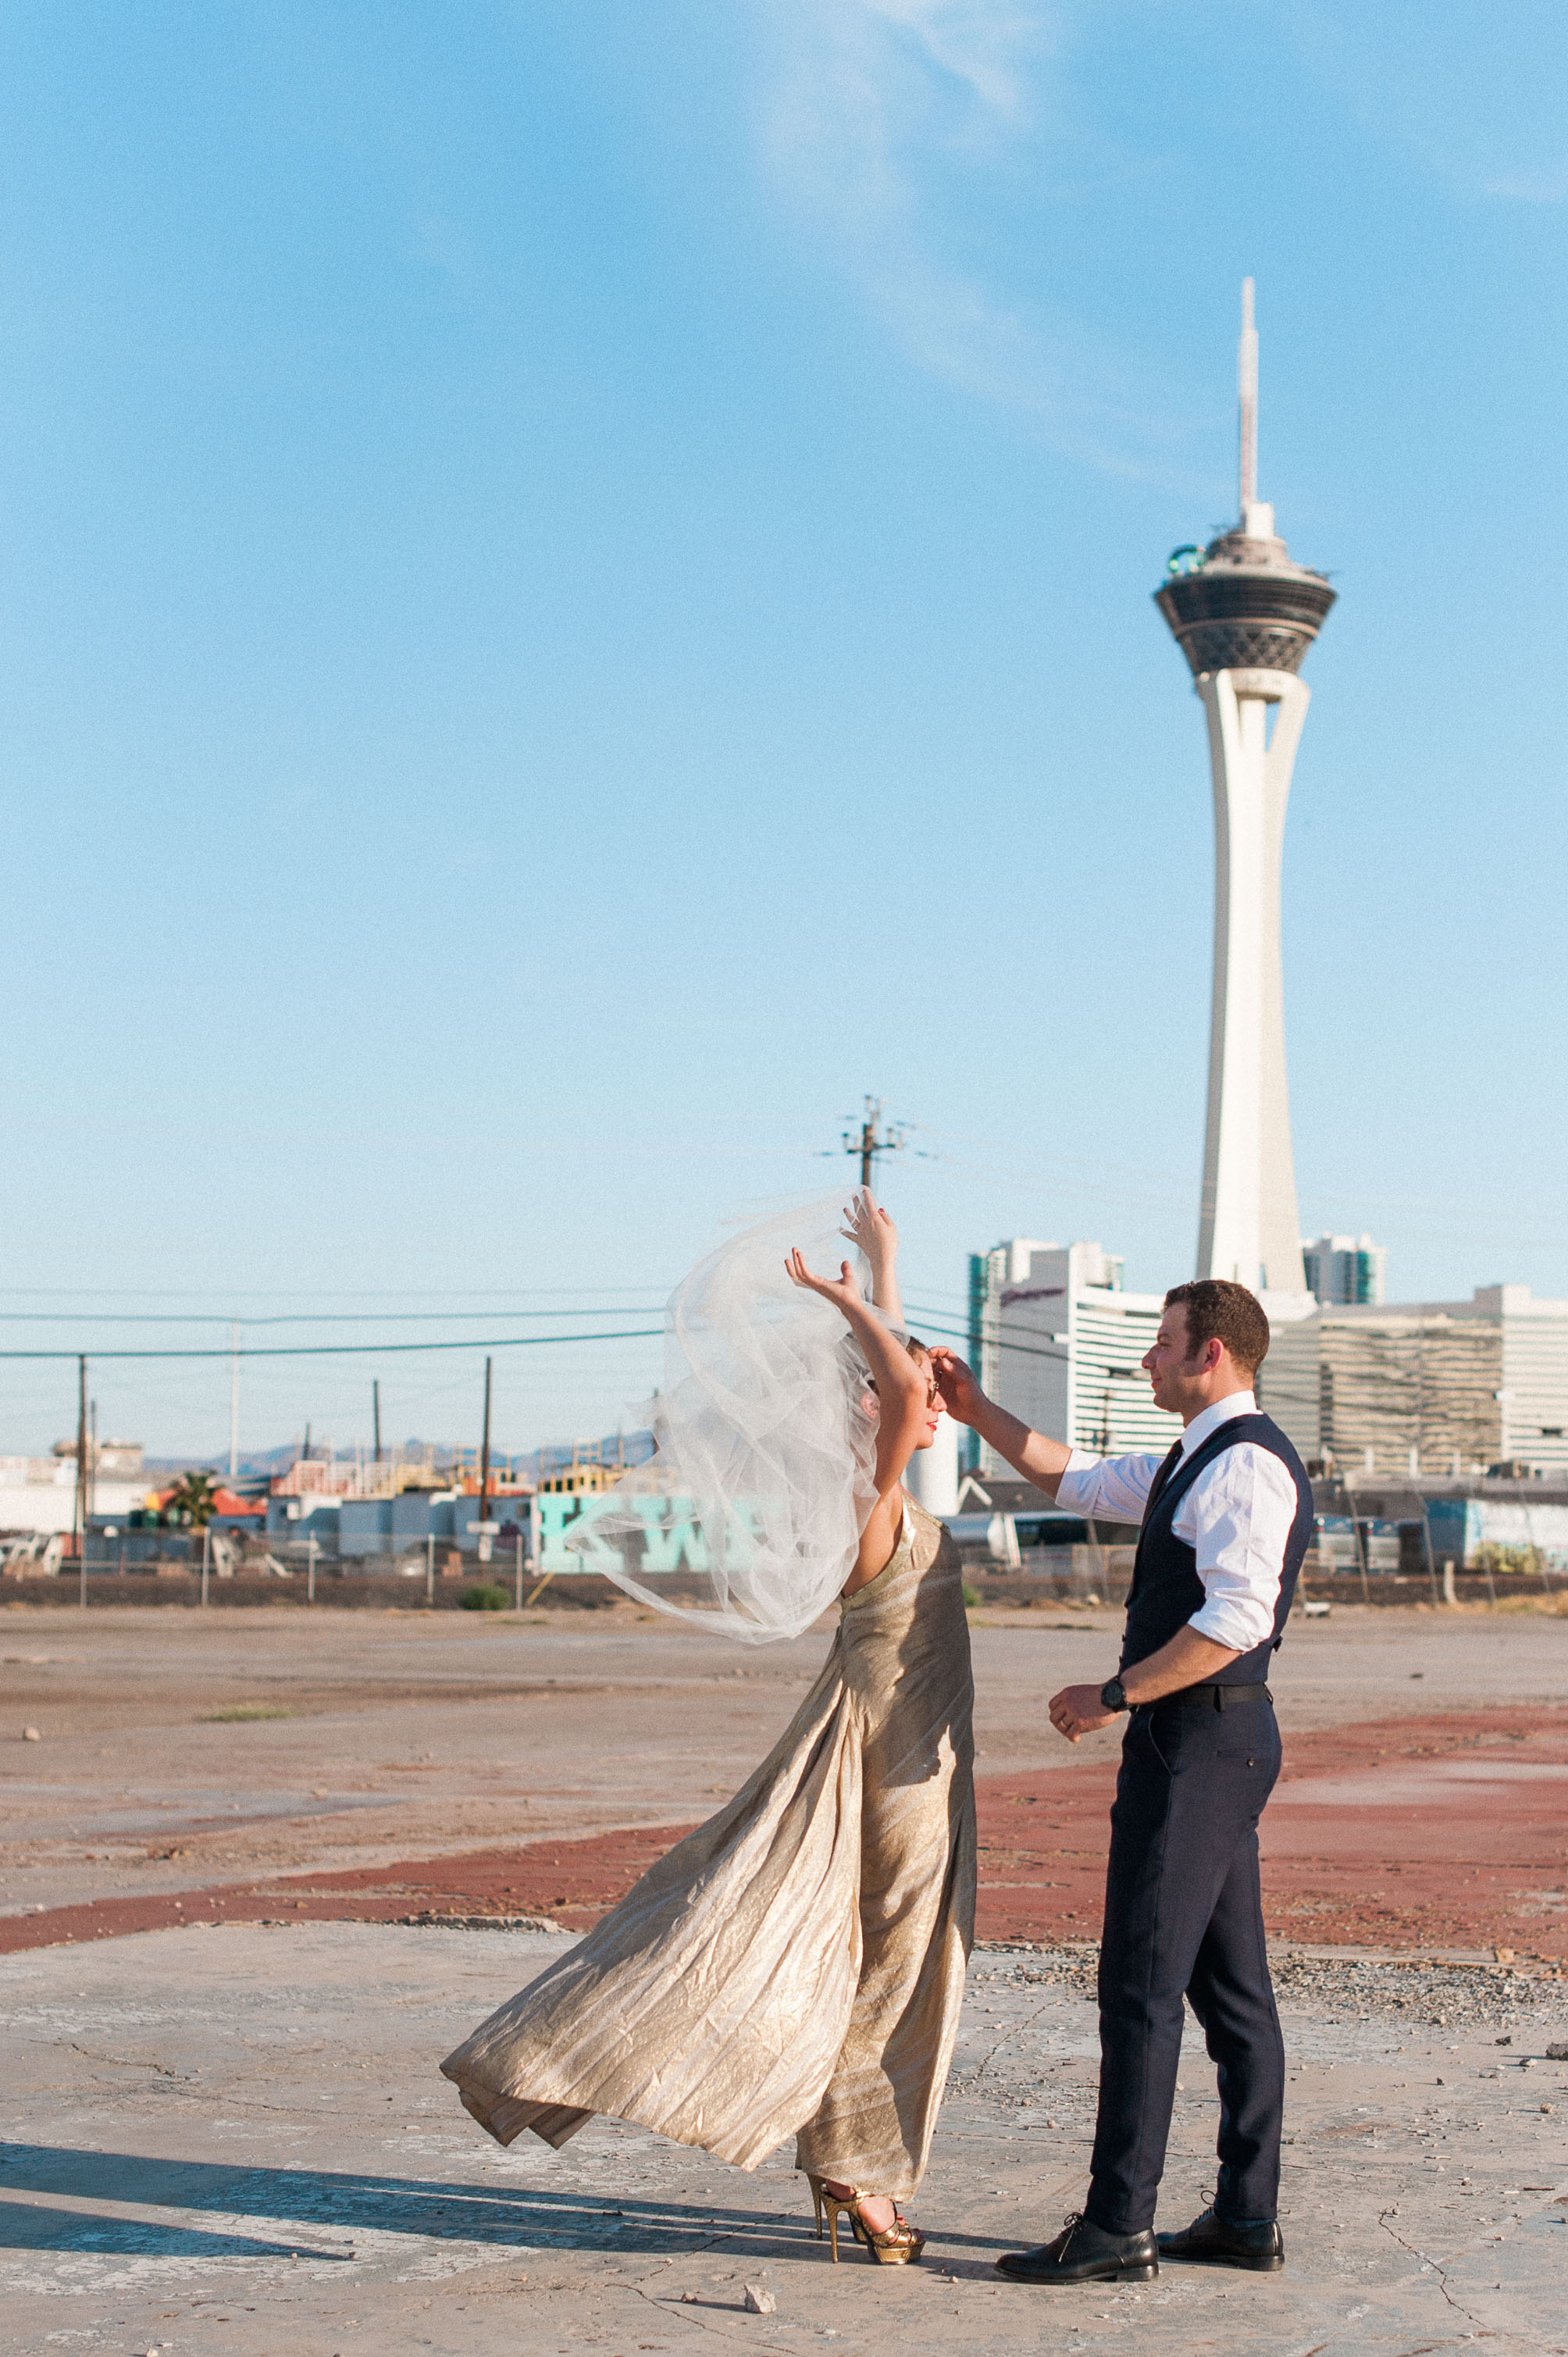 A bride lifts her veil for her groom in Las Vegas, Nevada. Wedding photography by Briana Morrison